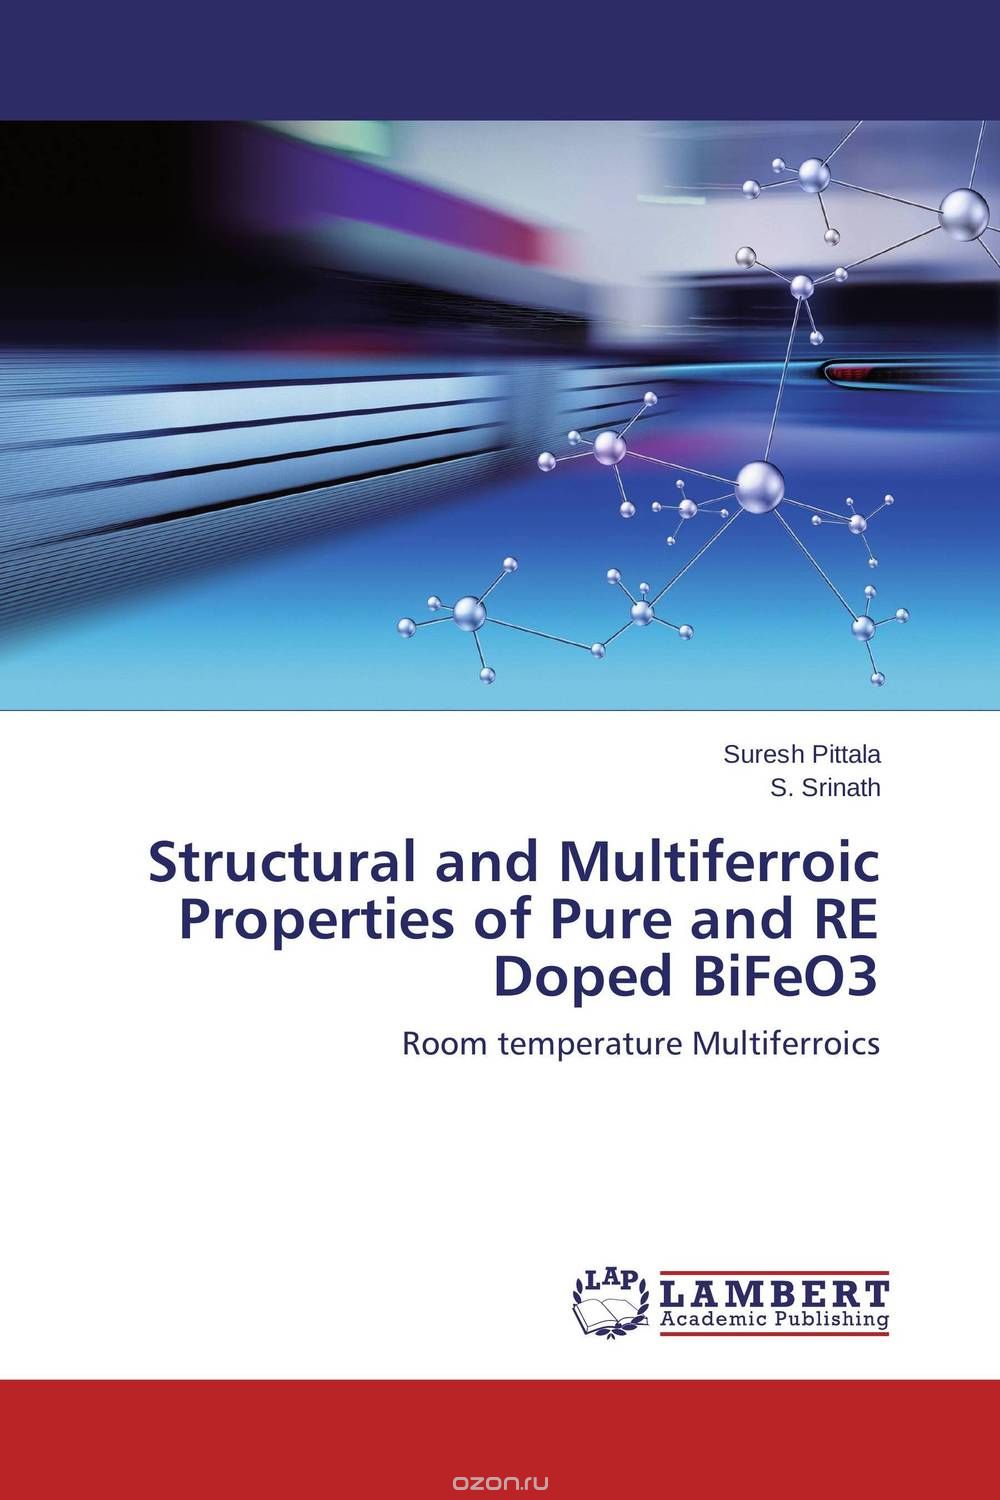 Скачать книгу "Structural and Multiferroic Properties of Pure and RE Doped BiFeO3"